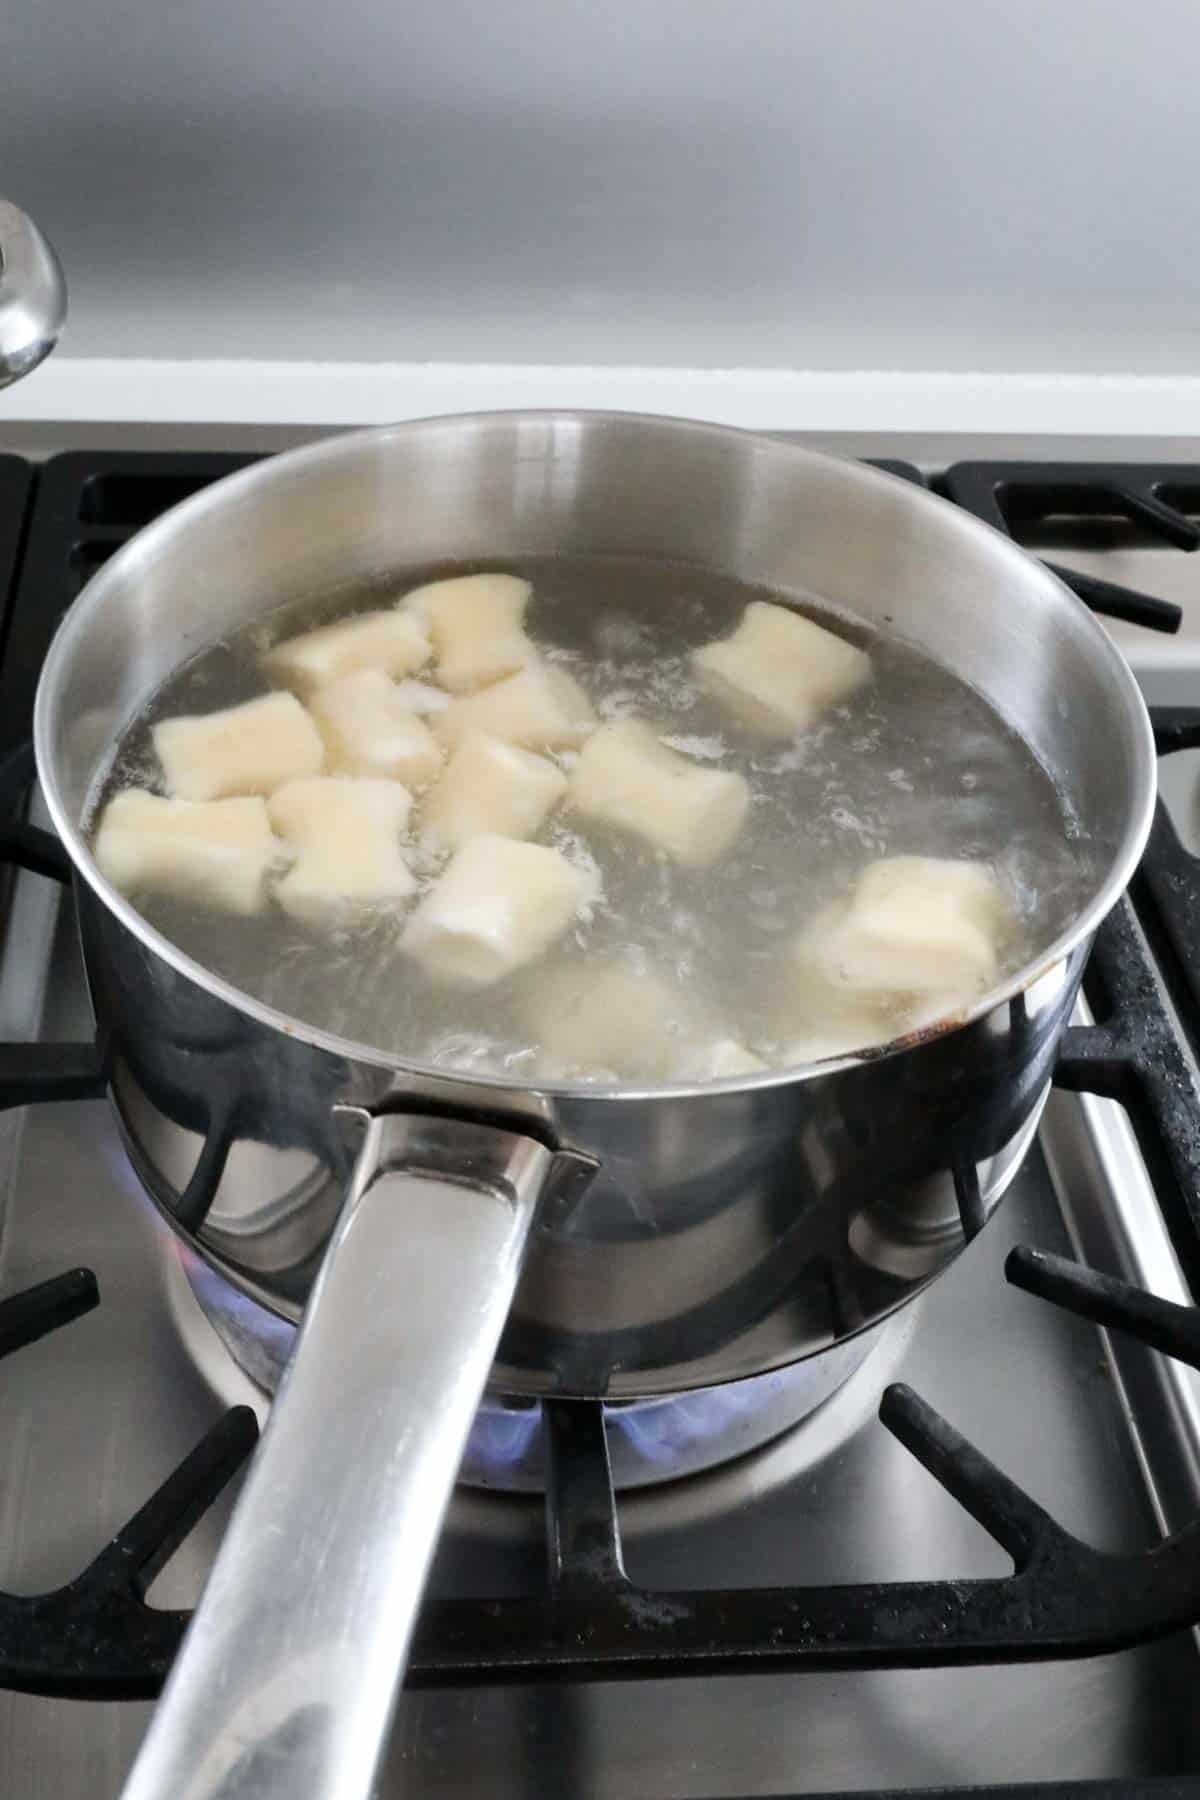 Gnocchi cooking in a pan of boiling water.